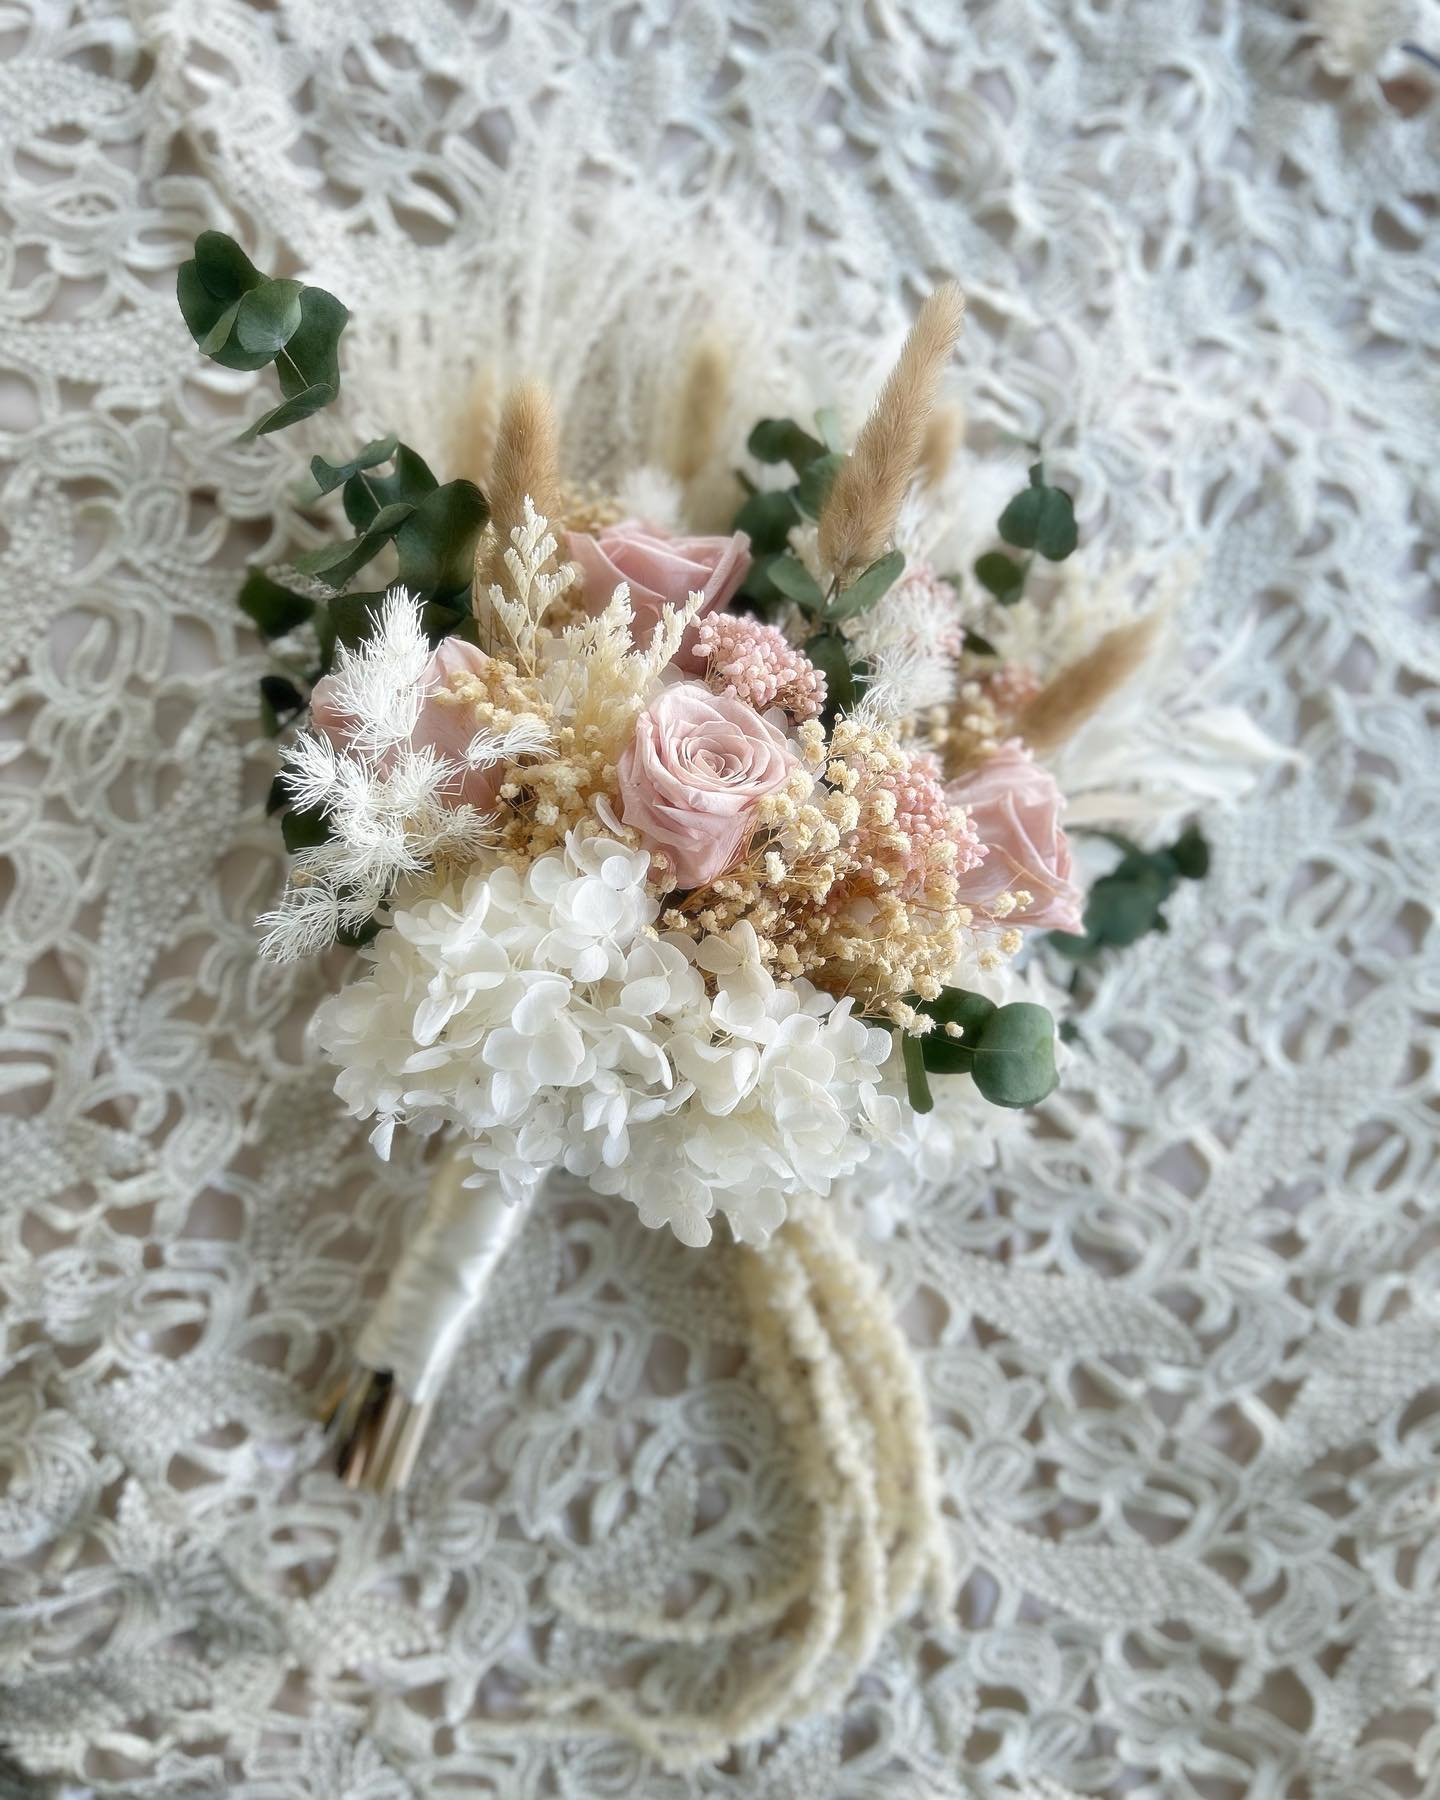 Some recent dried wedding pieces we&rsquo;ve worked on 🥰